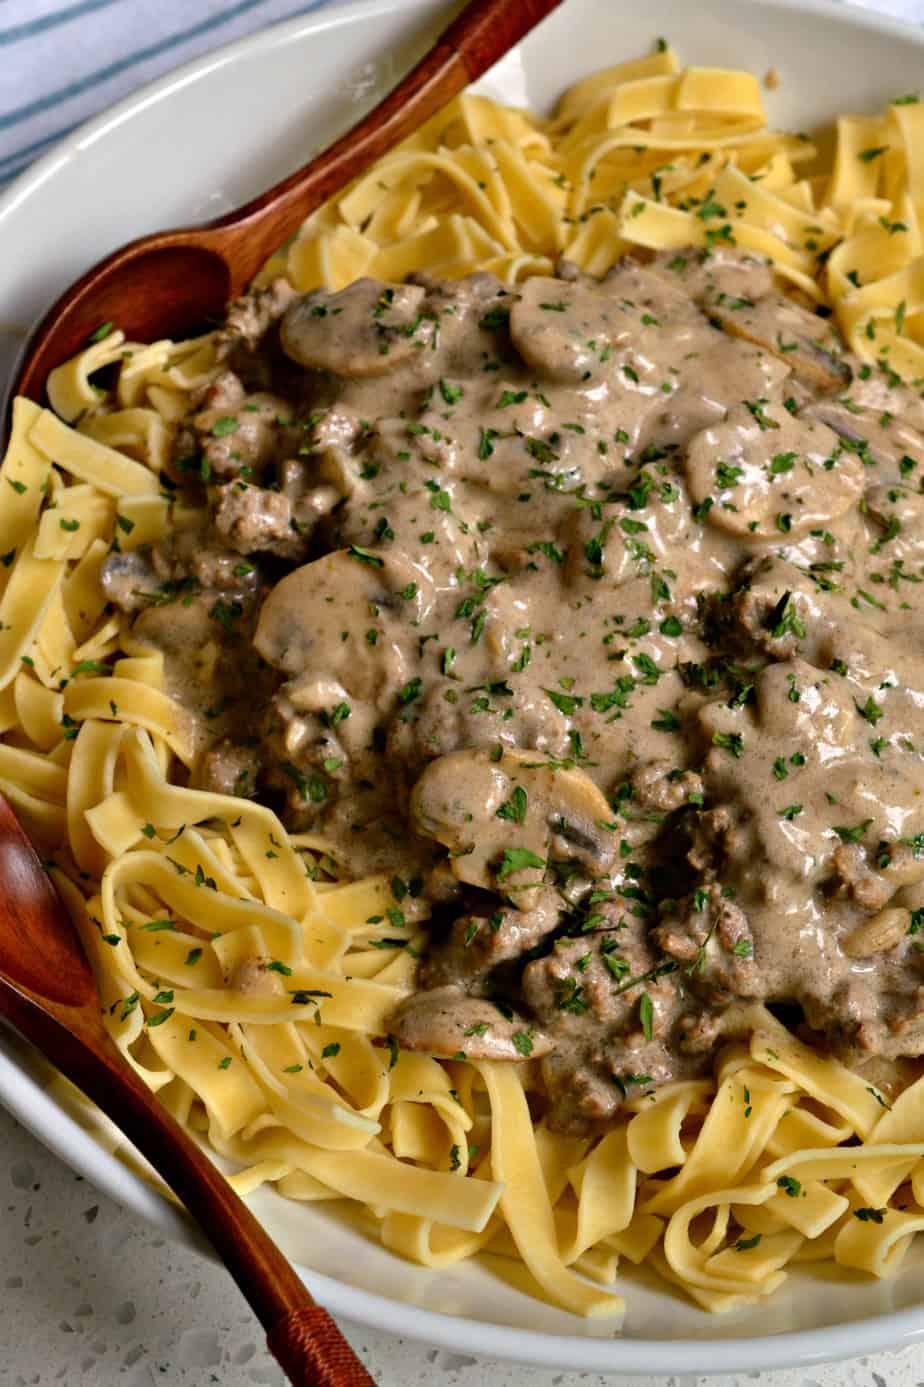 Best Beef Stroganoff Recipe with sour Cream – How to Make Perfect Recipes